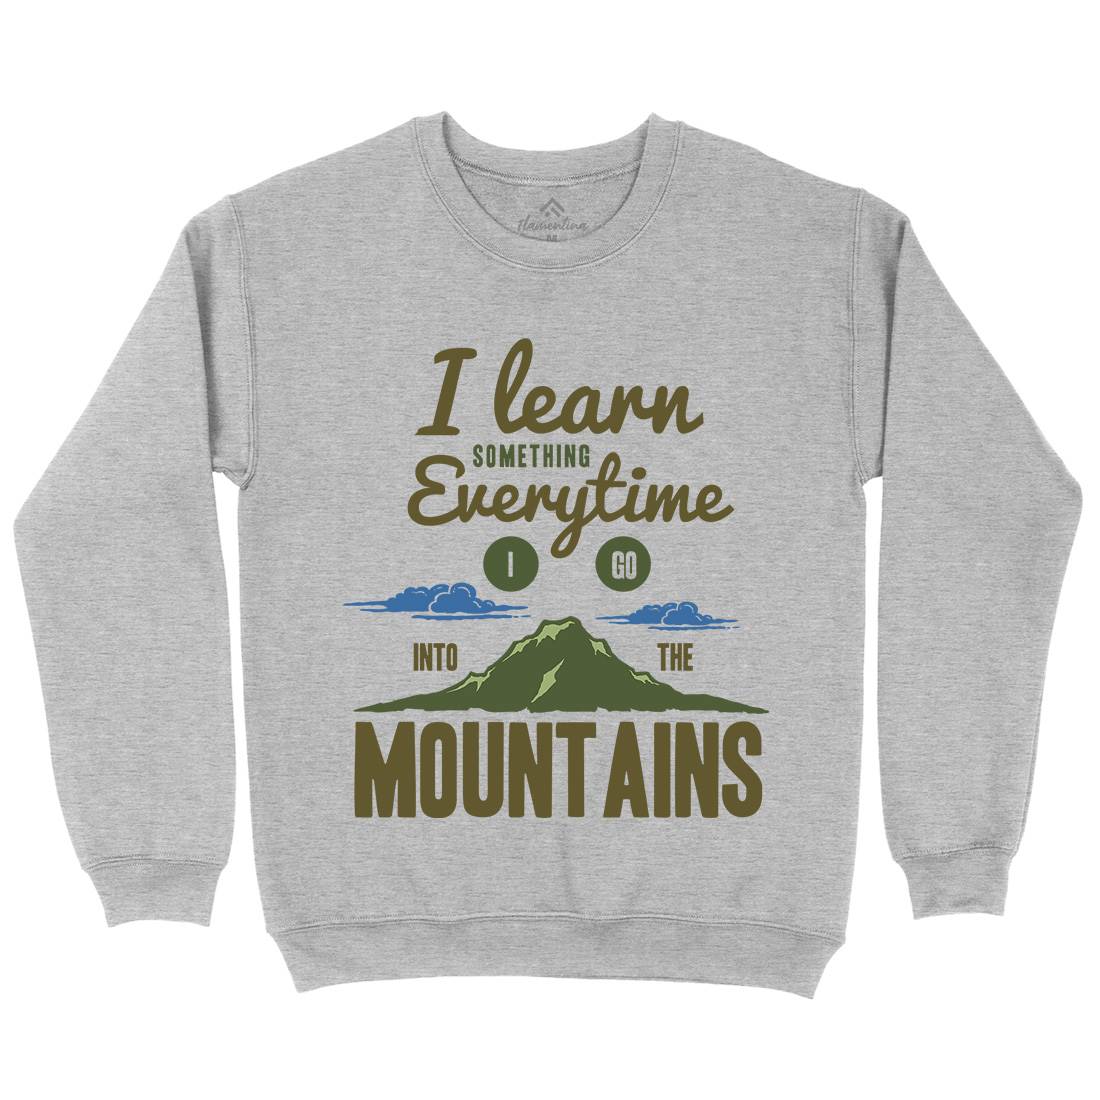 Learn From The Mountains Kids Crew Neck Sweatshirt Nature A335